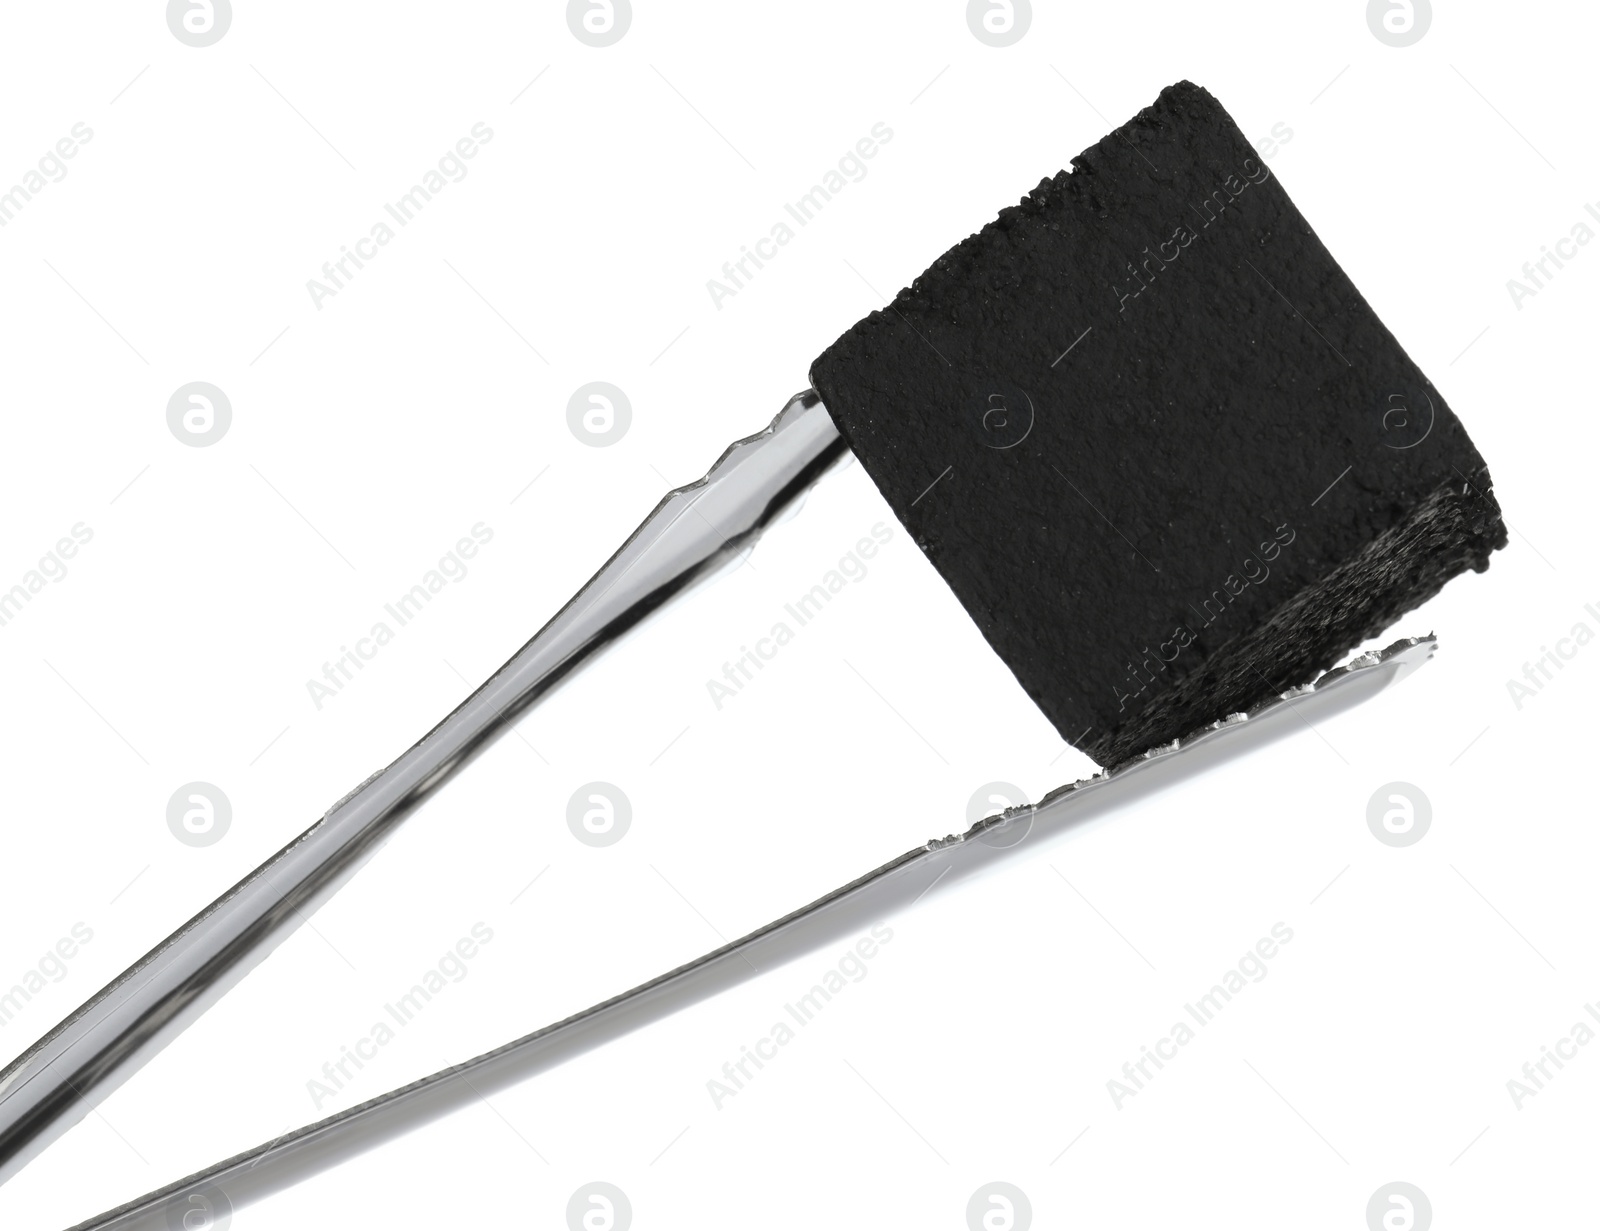 Photo of Tongs with charcoal cube for hookah on white background